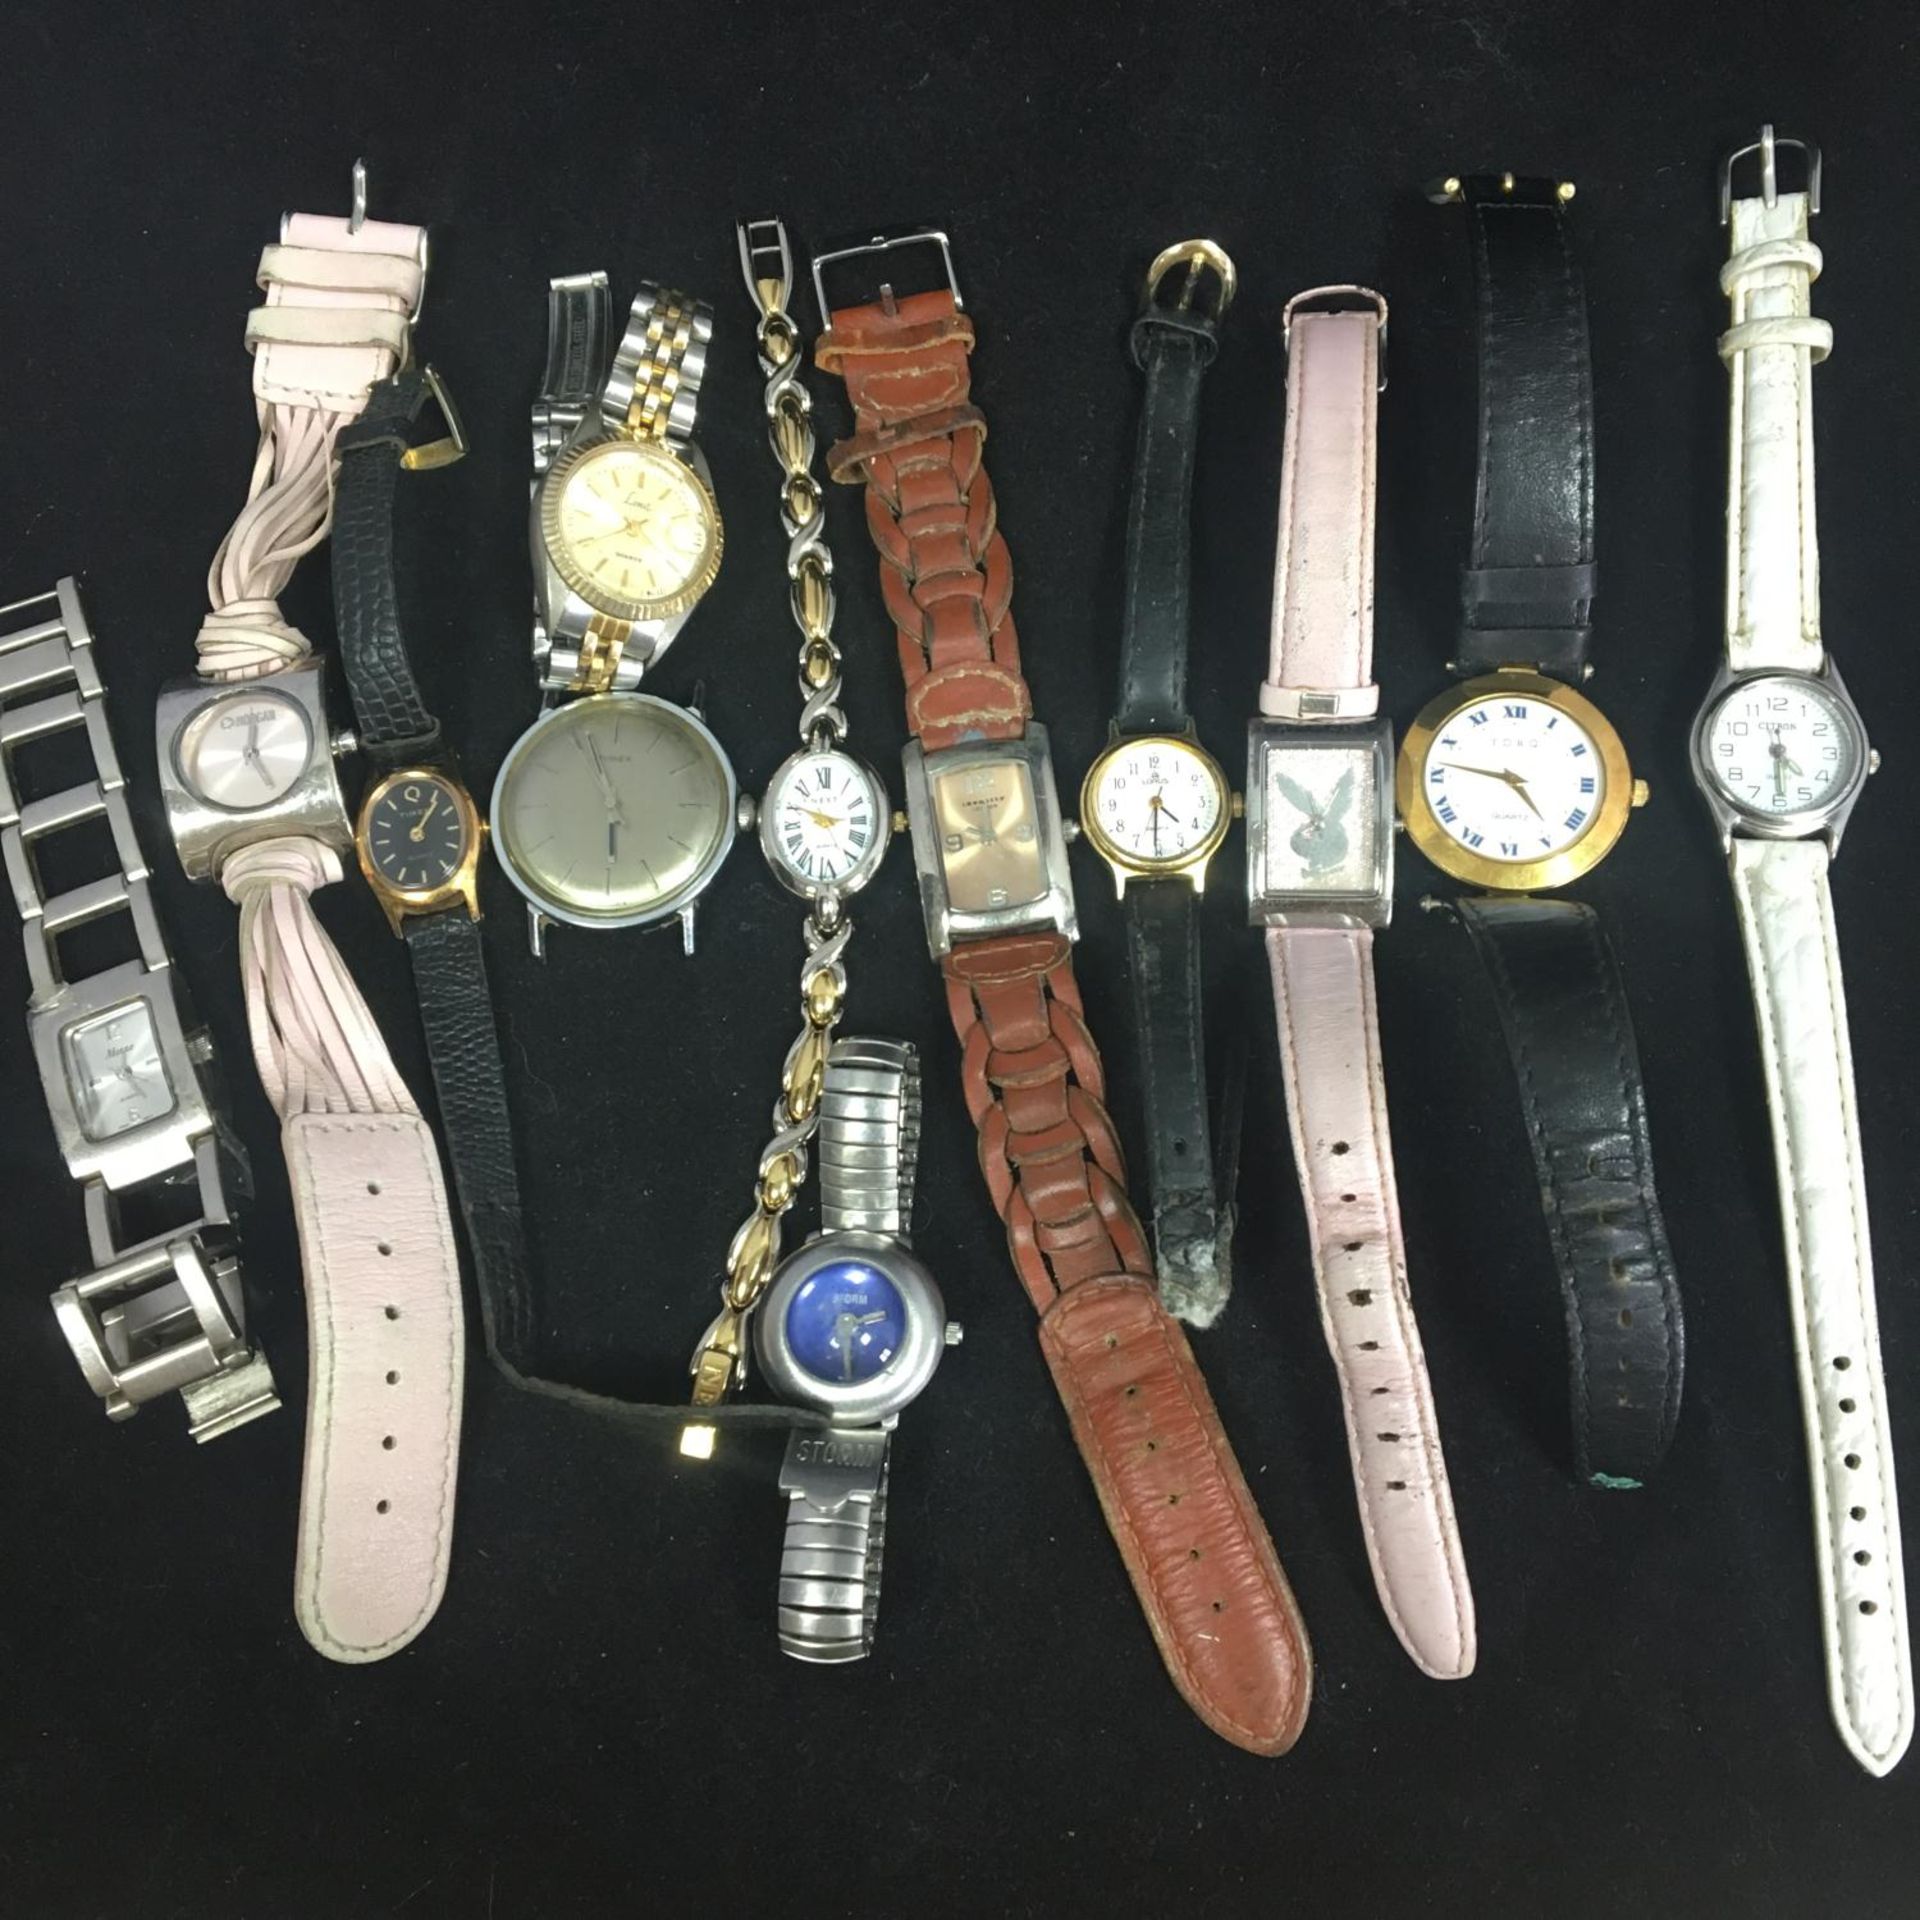 Quantity of various preowned watches to include Lorus, Torq, Timex, Storm etc. None are currently